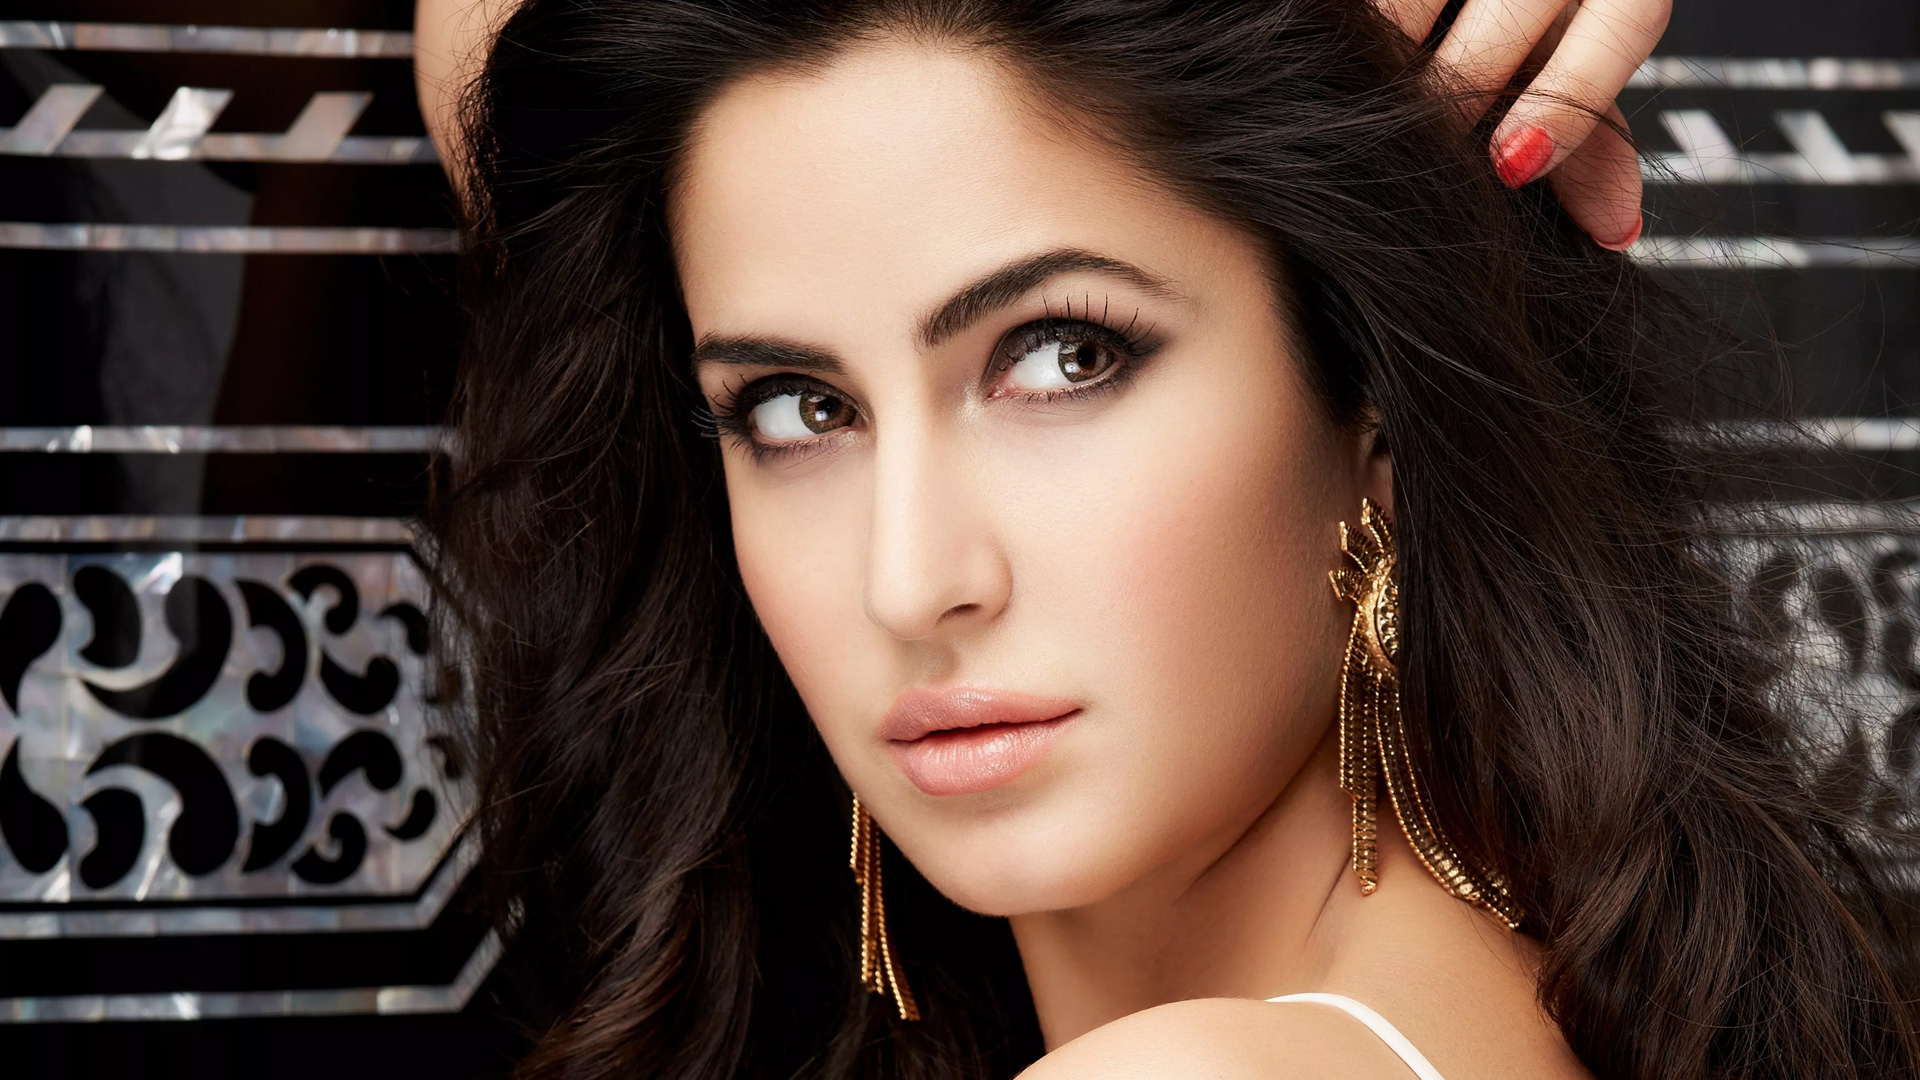 In which movie Katrina Kaif  did play the role of ISI agent?